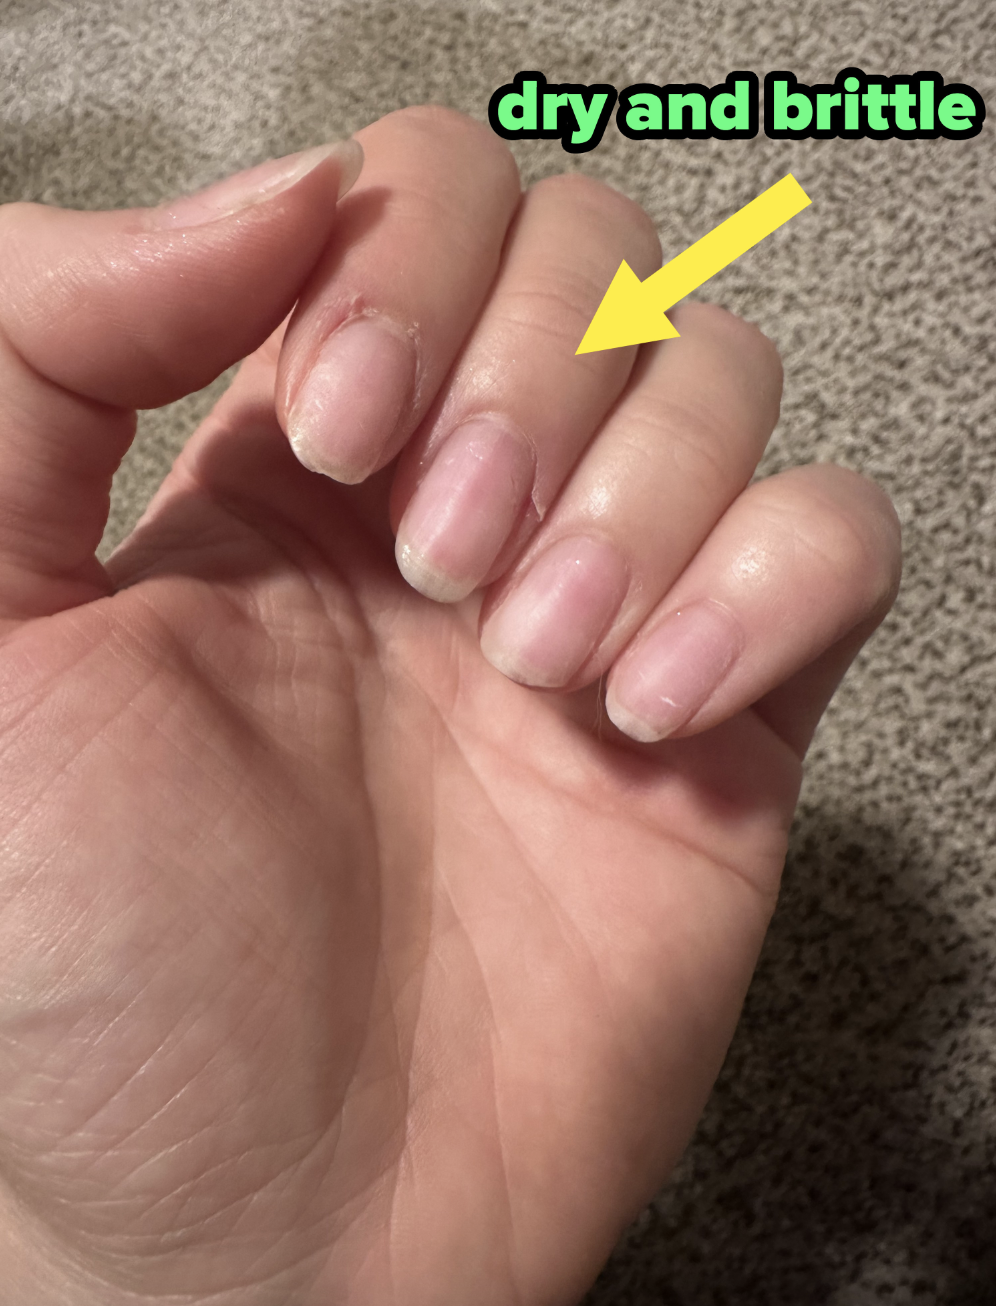 Tips for soft peeling nails? This has been a struggle forever :  r/RedditLaqueristas